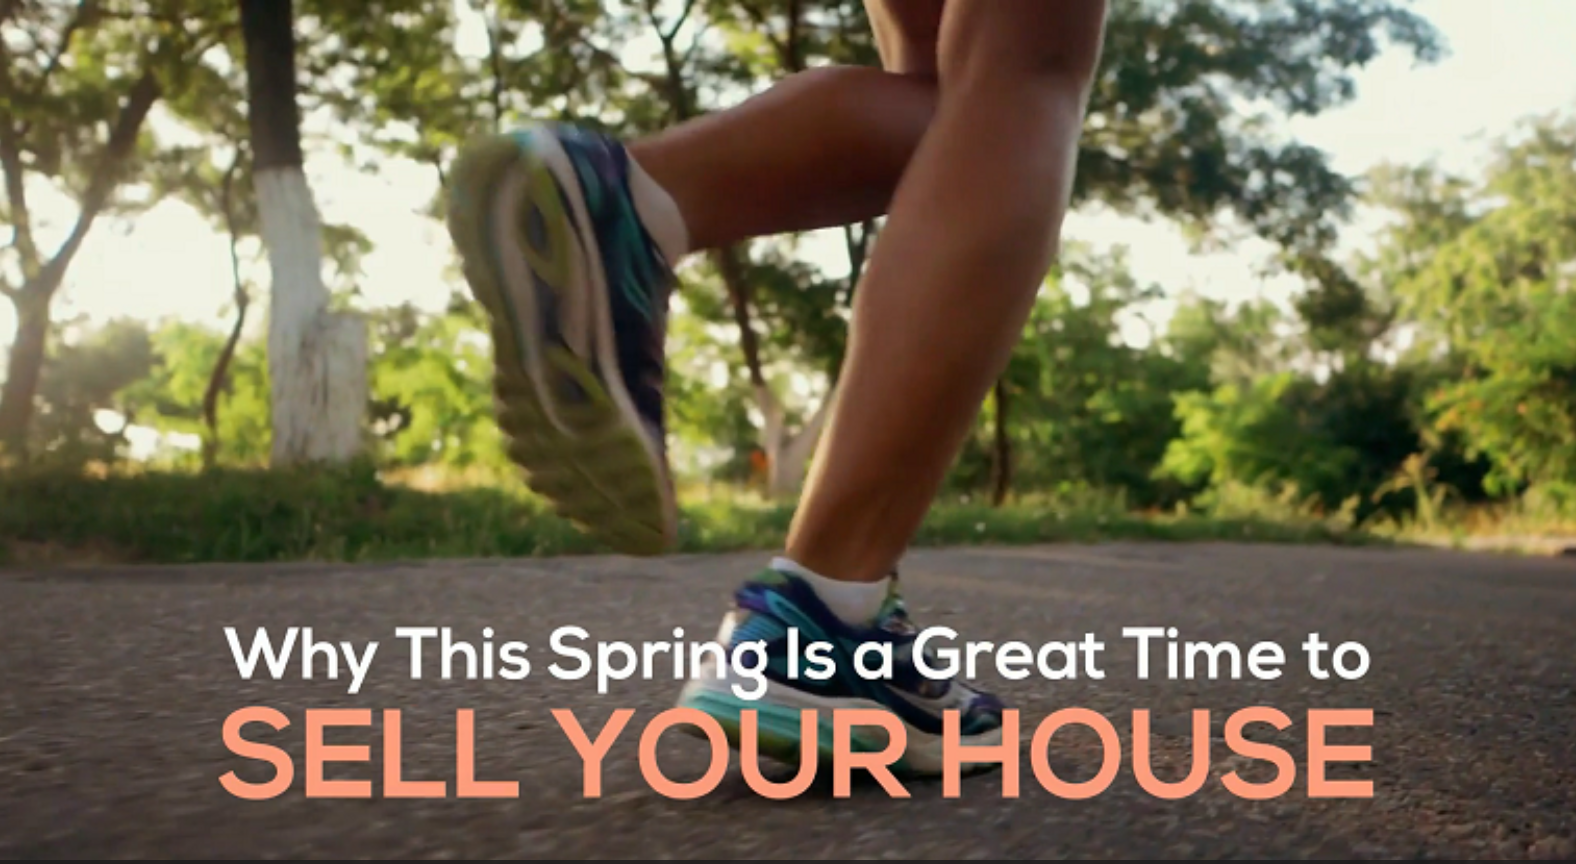 Why This Spring Is a Great Time to Sell Your House